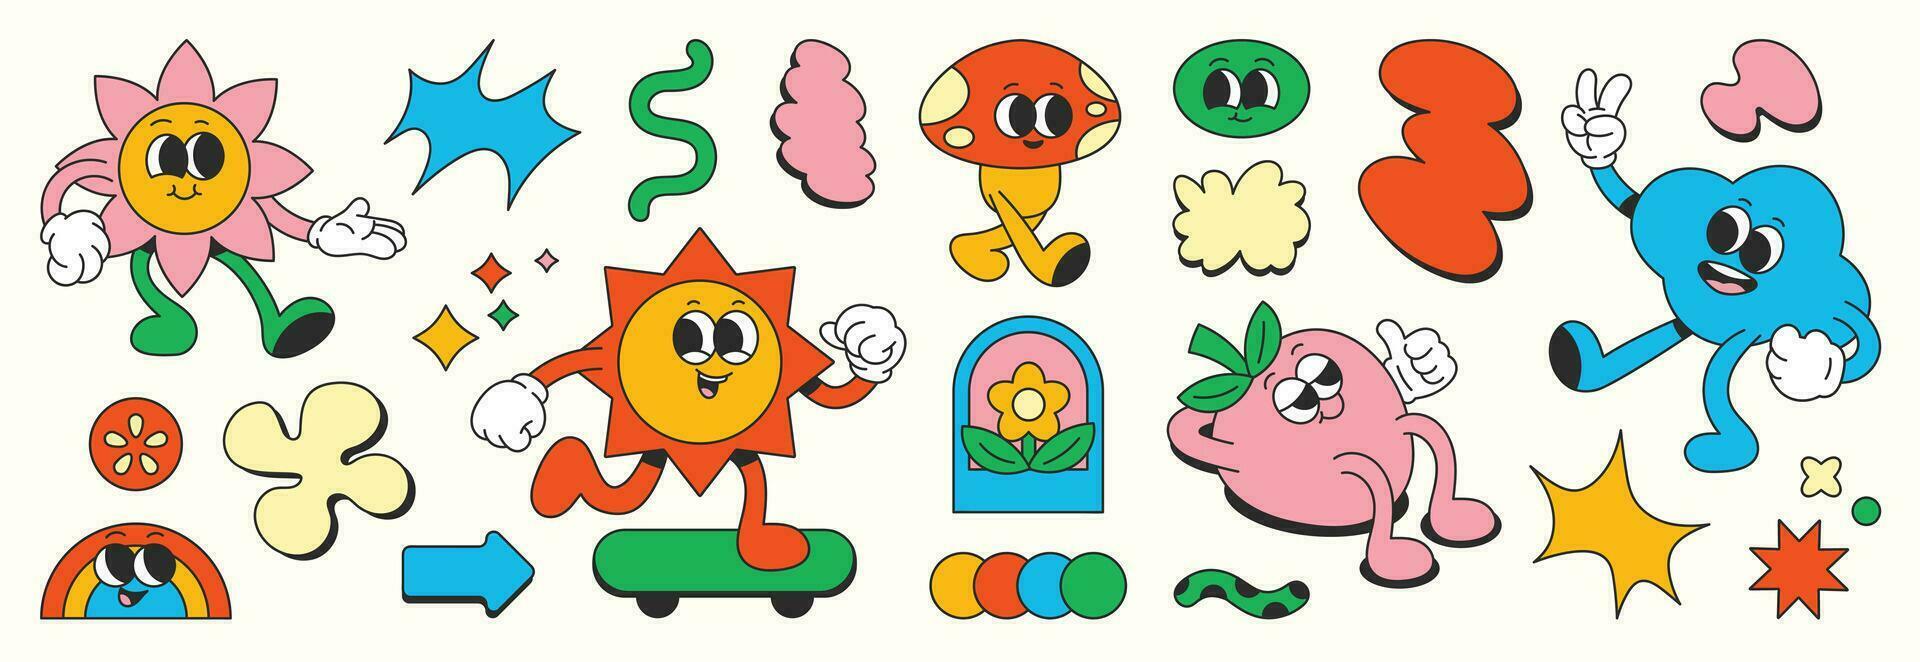 Set of 70s groovy element vector. Collection of cartoon characters, doodle smile face, sun, skateboard, flower, mushroom, strawberry. Cute retro groovy hippie design for decorative, sticker, kids. vector